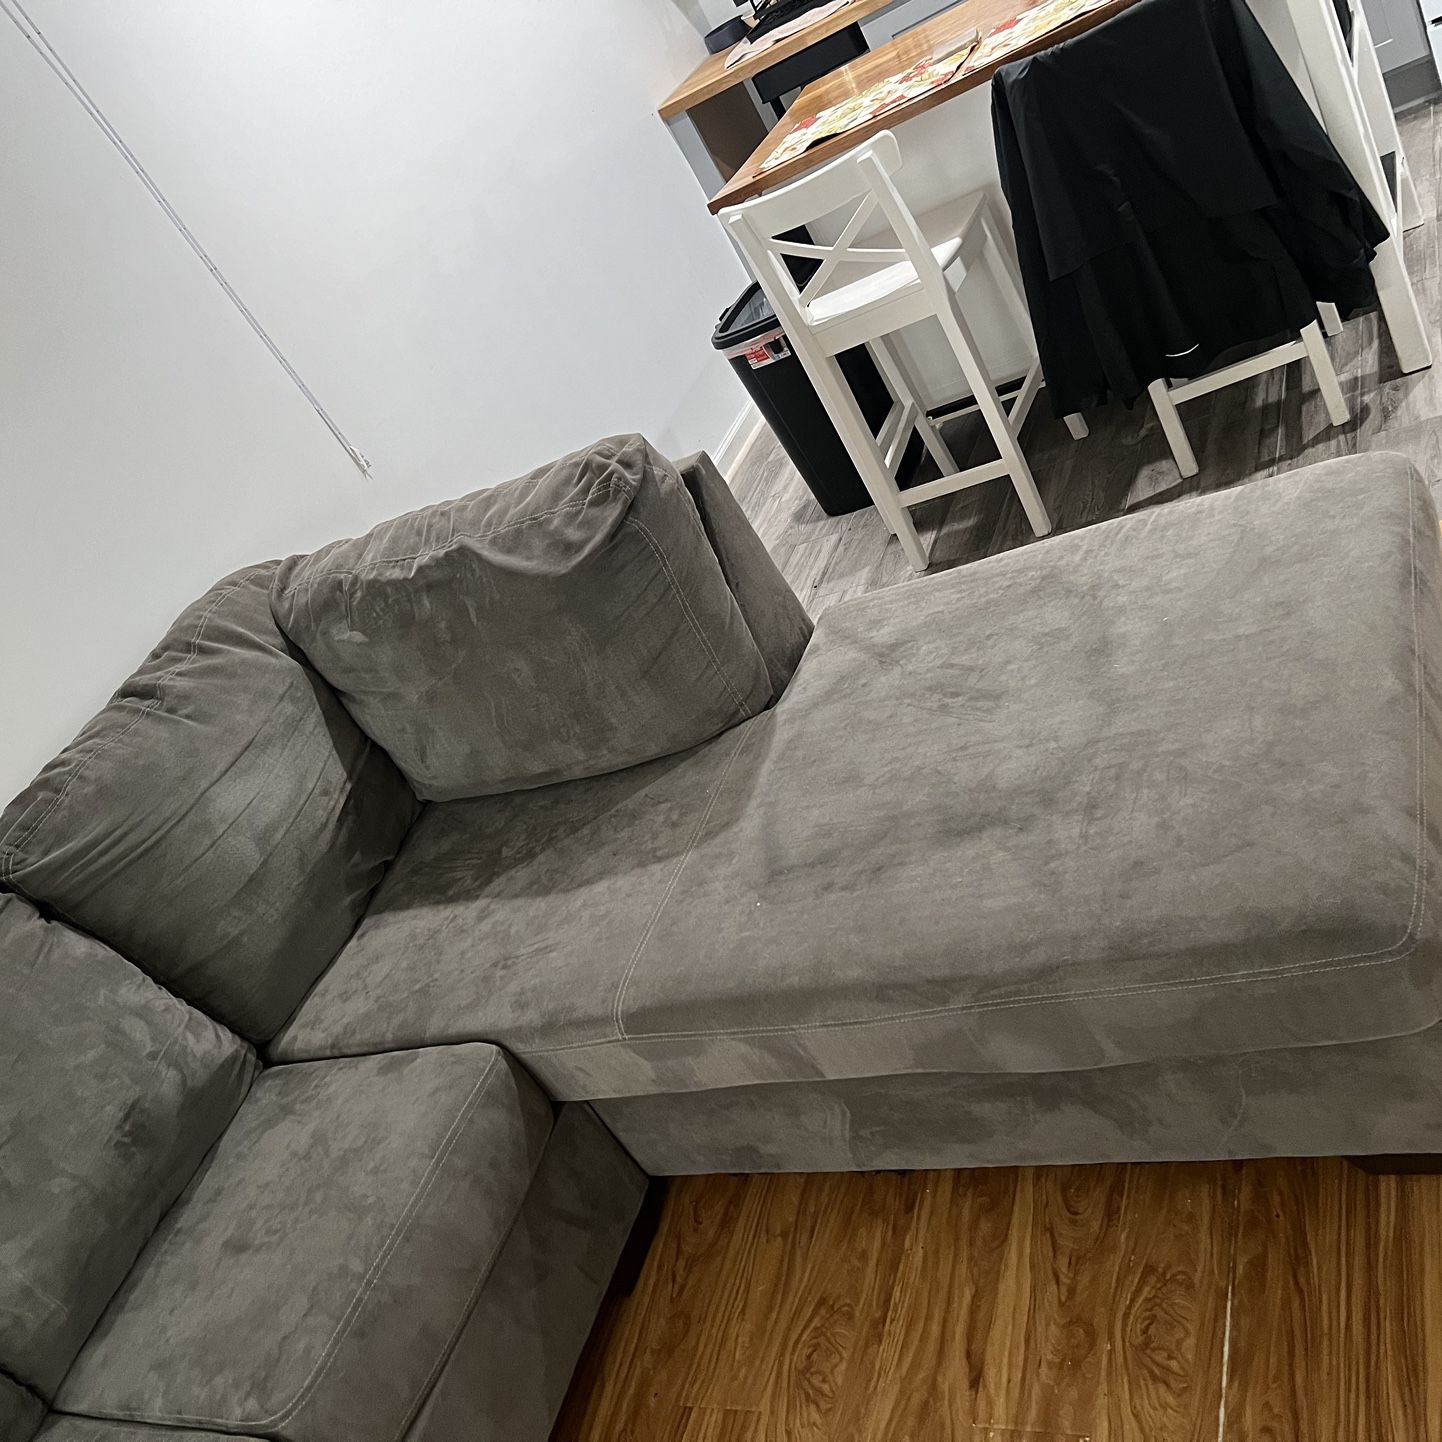 Grey Sectional Couch 